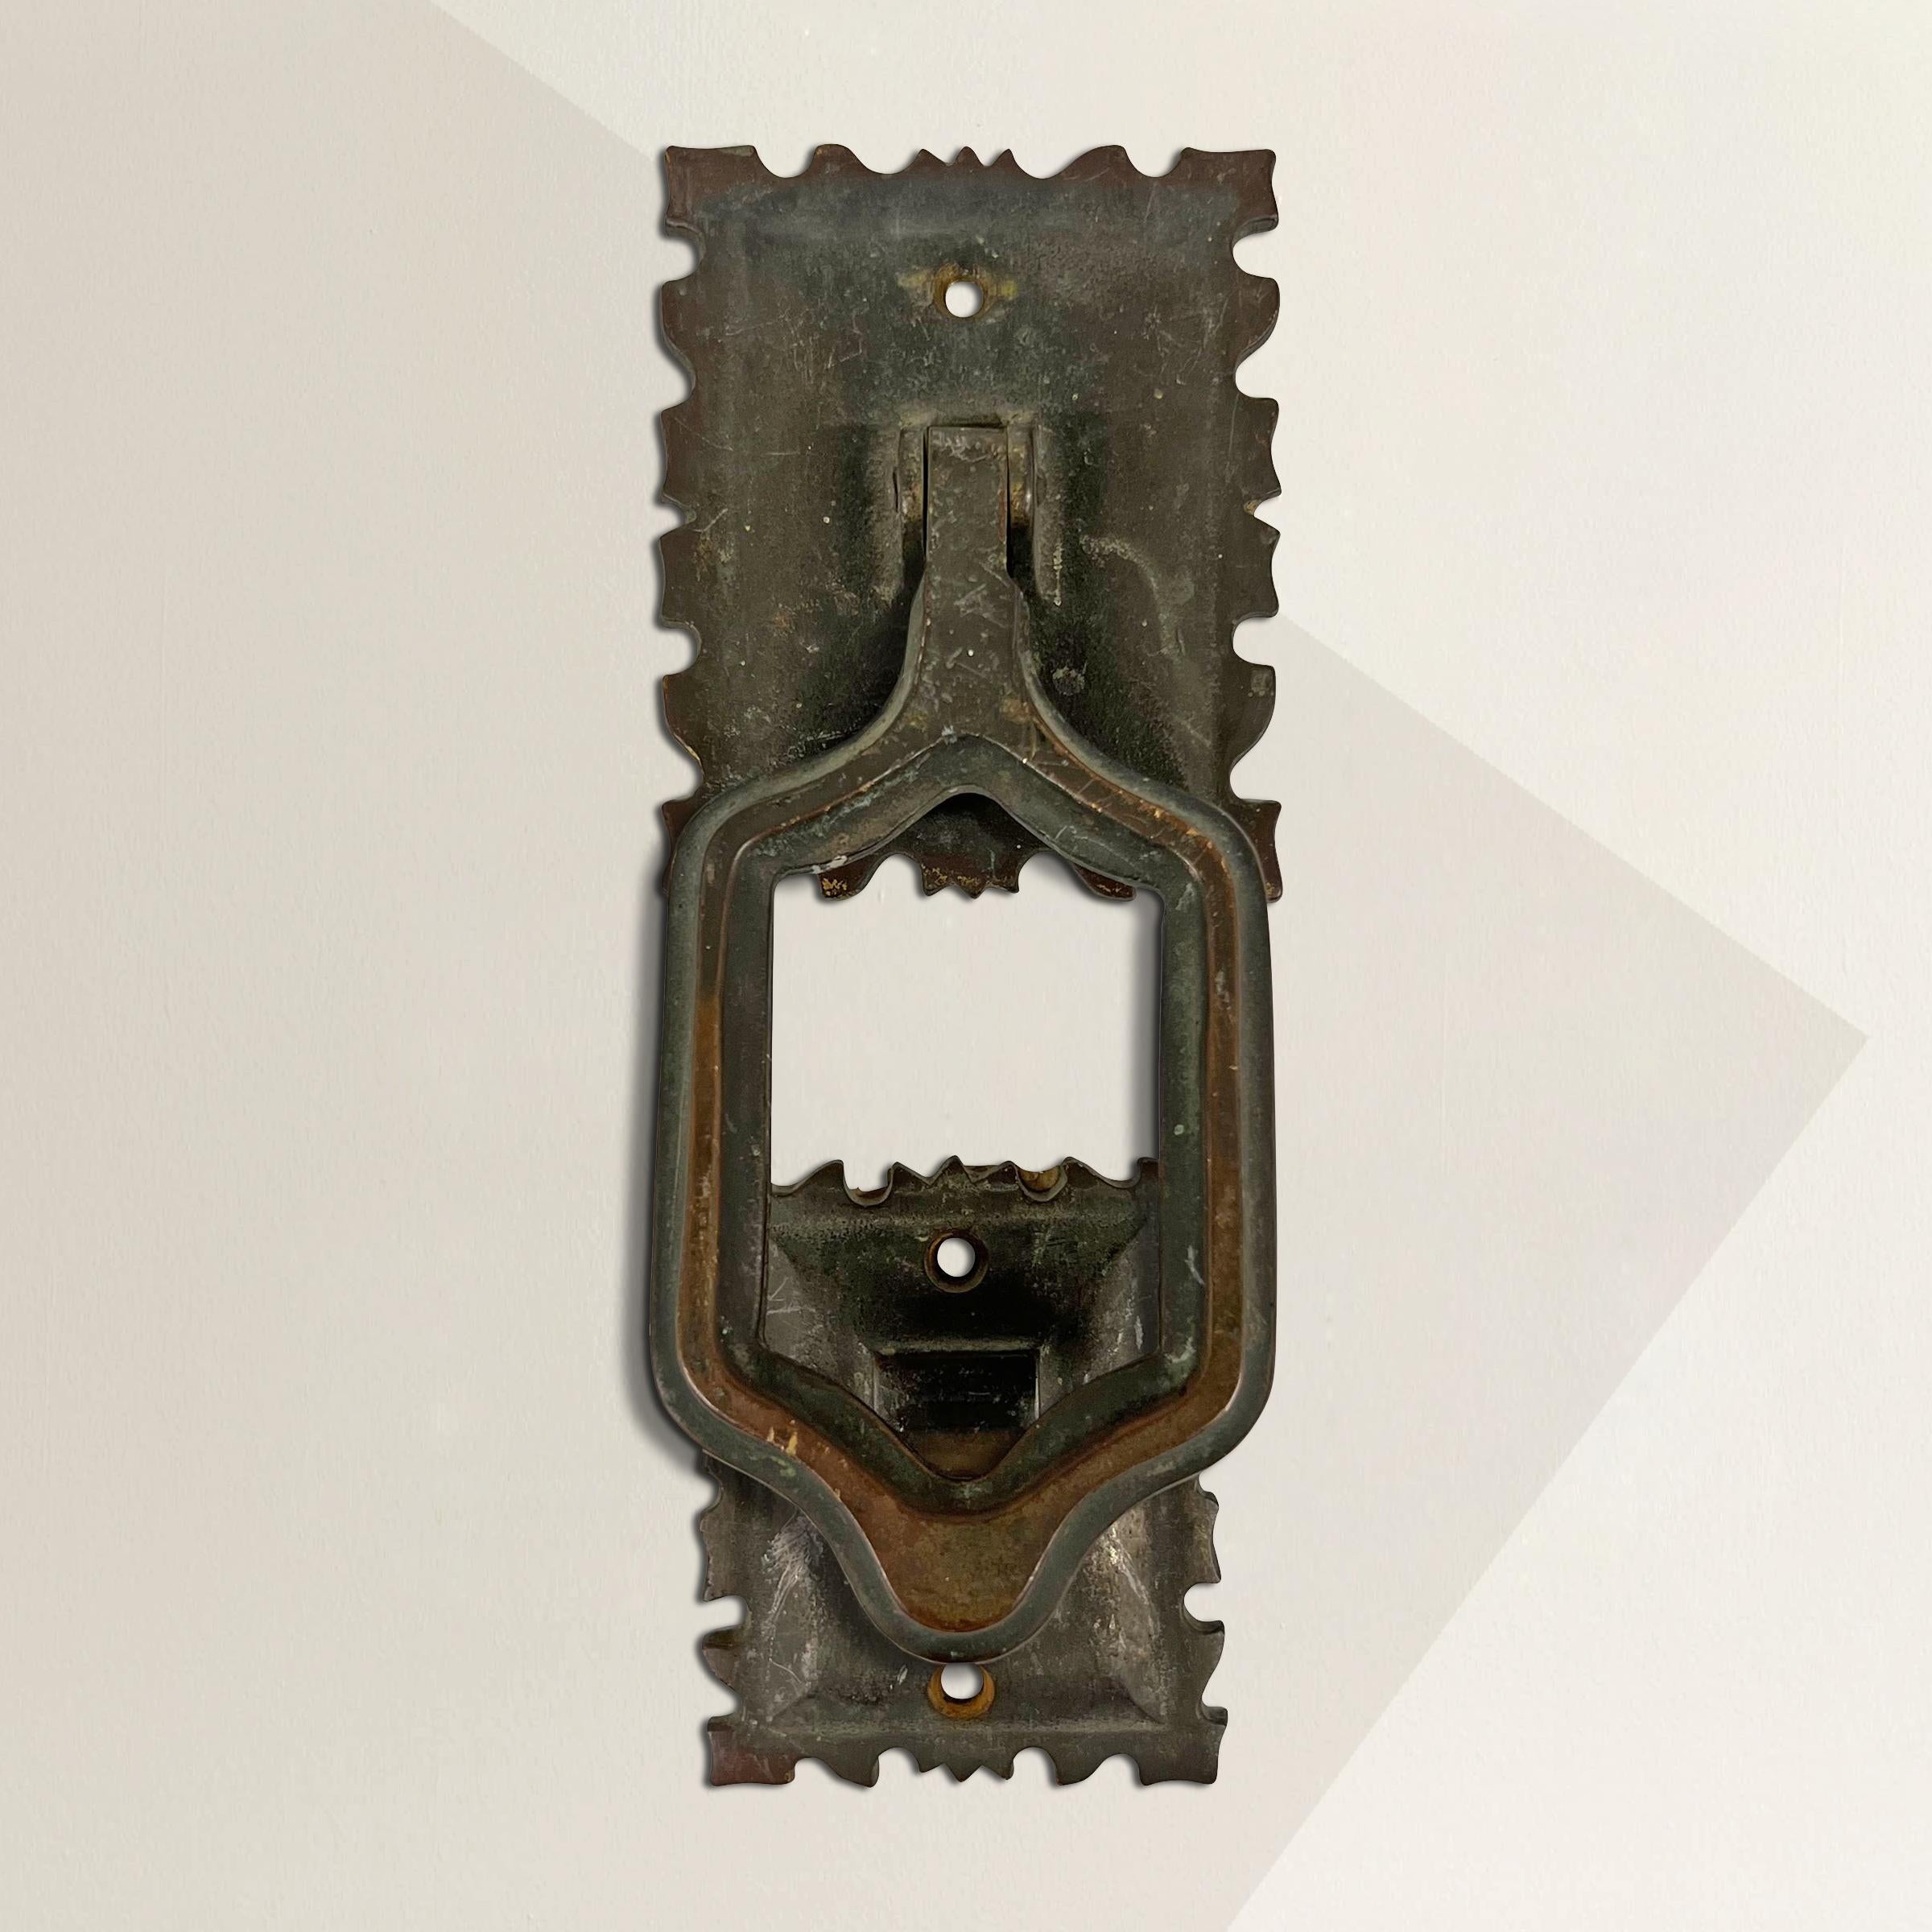 A striking early 20th century American Arts & Crafts cast bronze door knocker with a knot to Gothic design, with scalloped back and strike plates, and a wonderful patina only a hundred years of use could bestow.